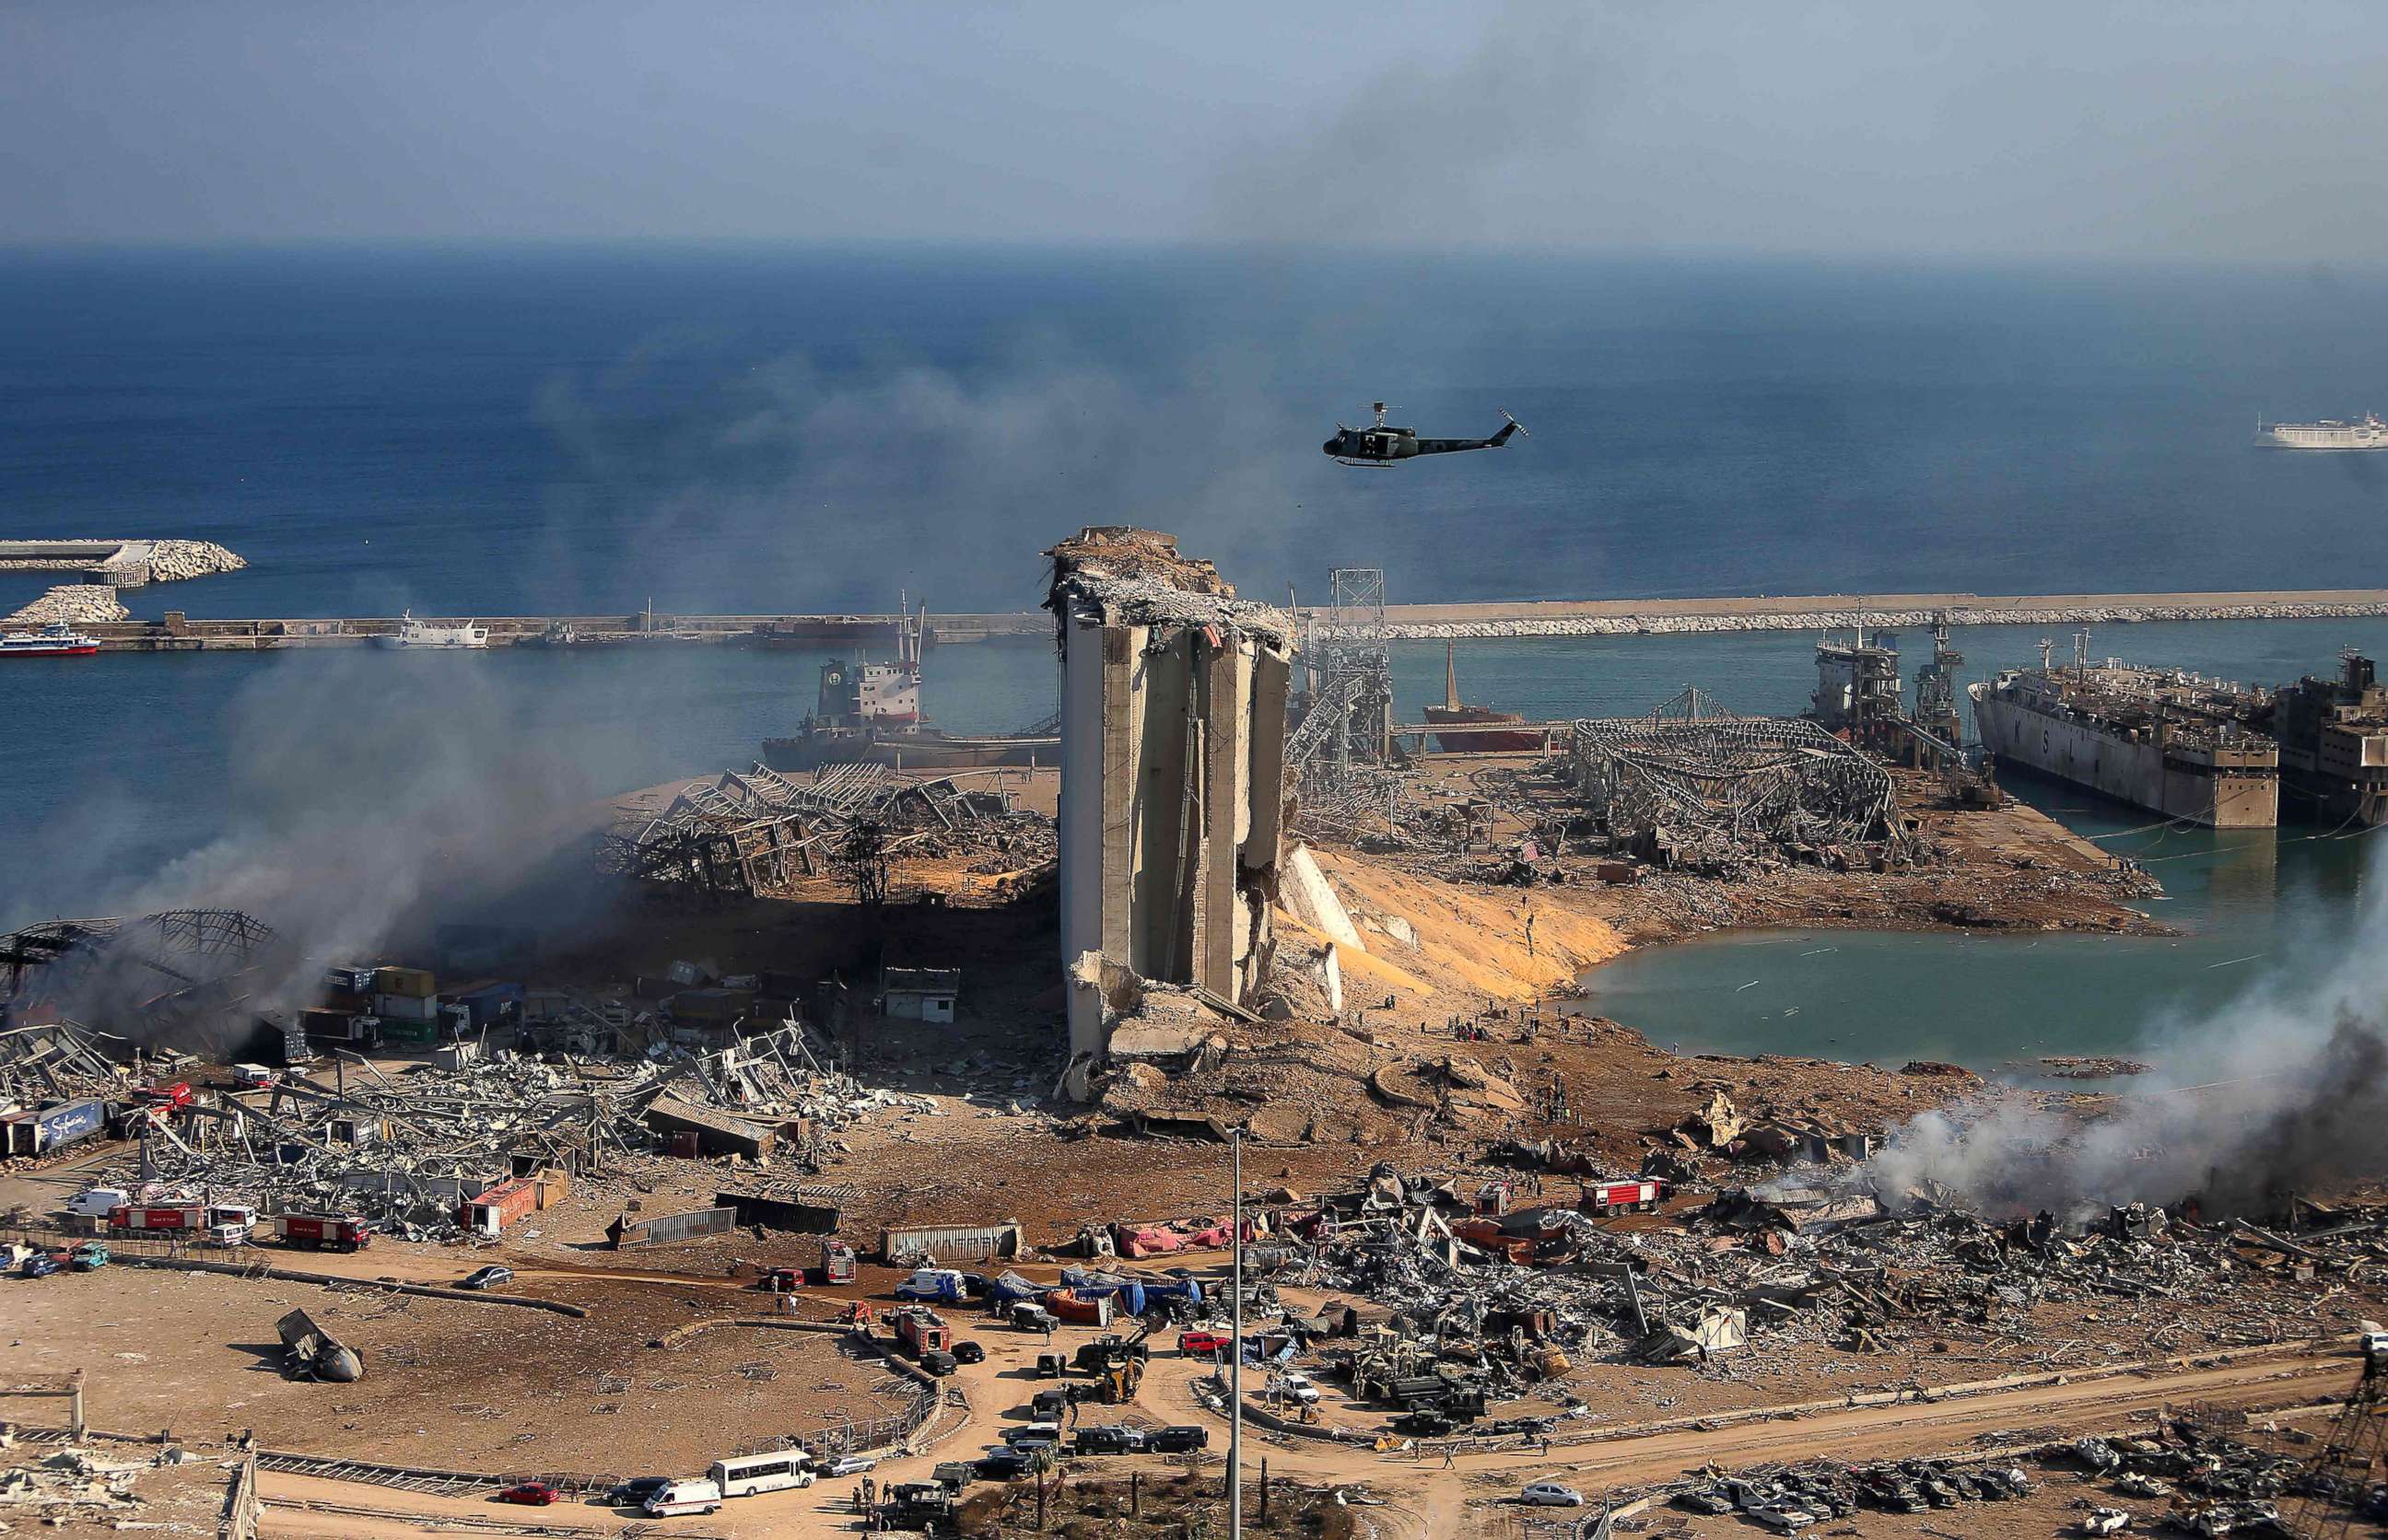 PHOTO: Damaged grain silos and its surroundings, Aug. 5, 2020, one day after a powerful explosion tore through Beirut.